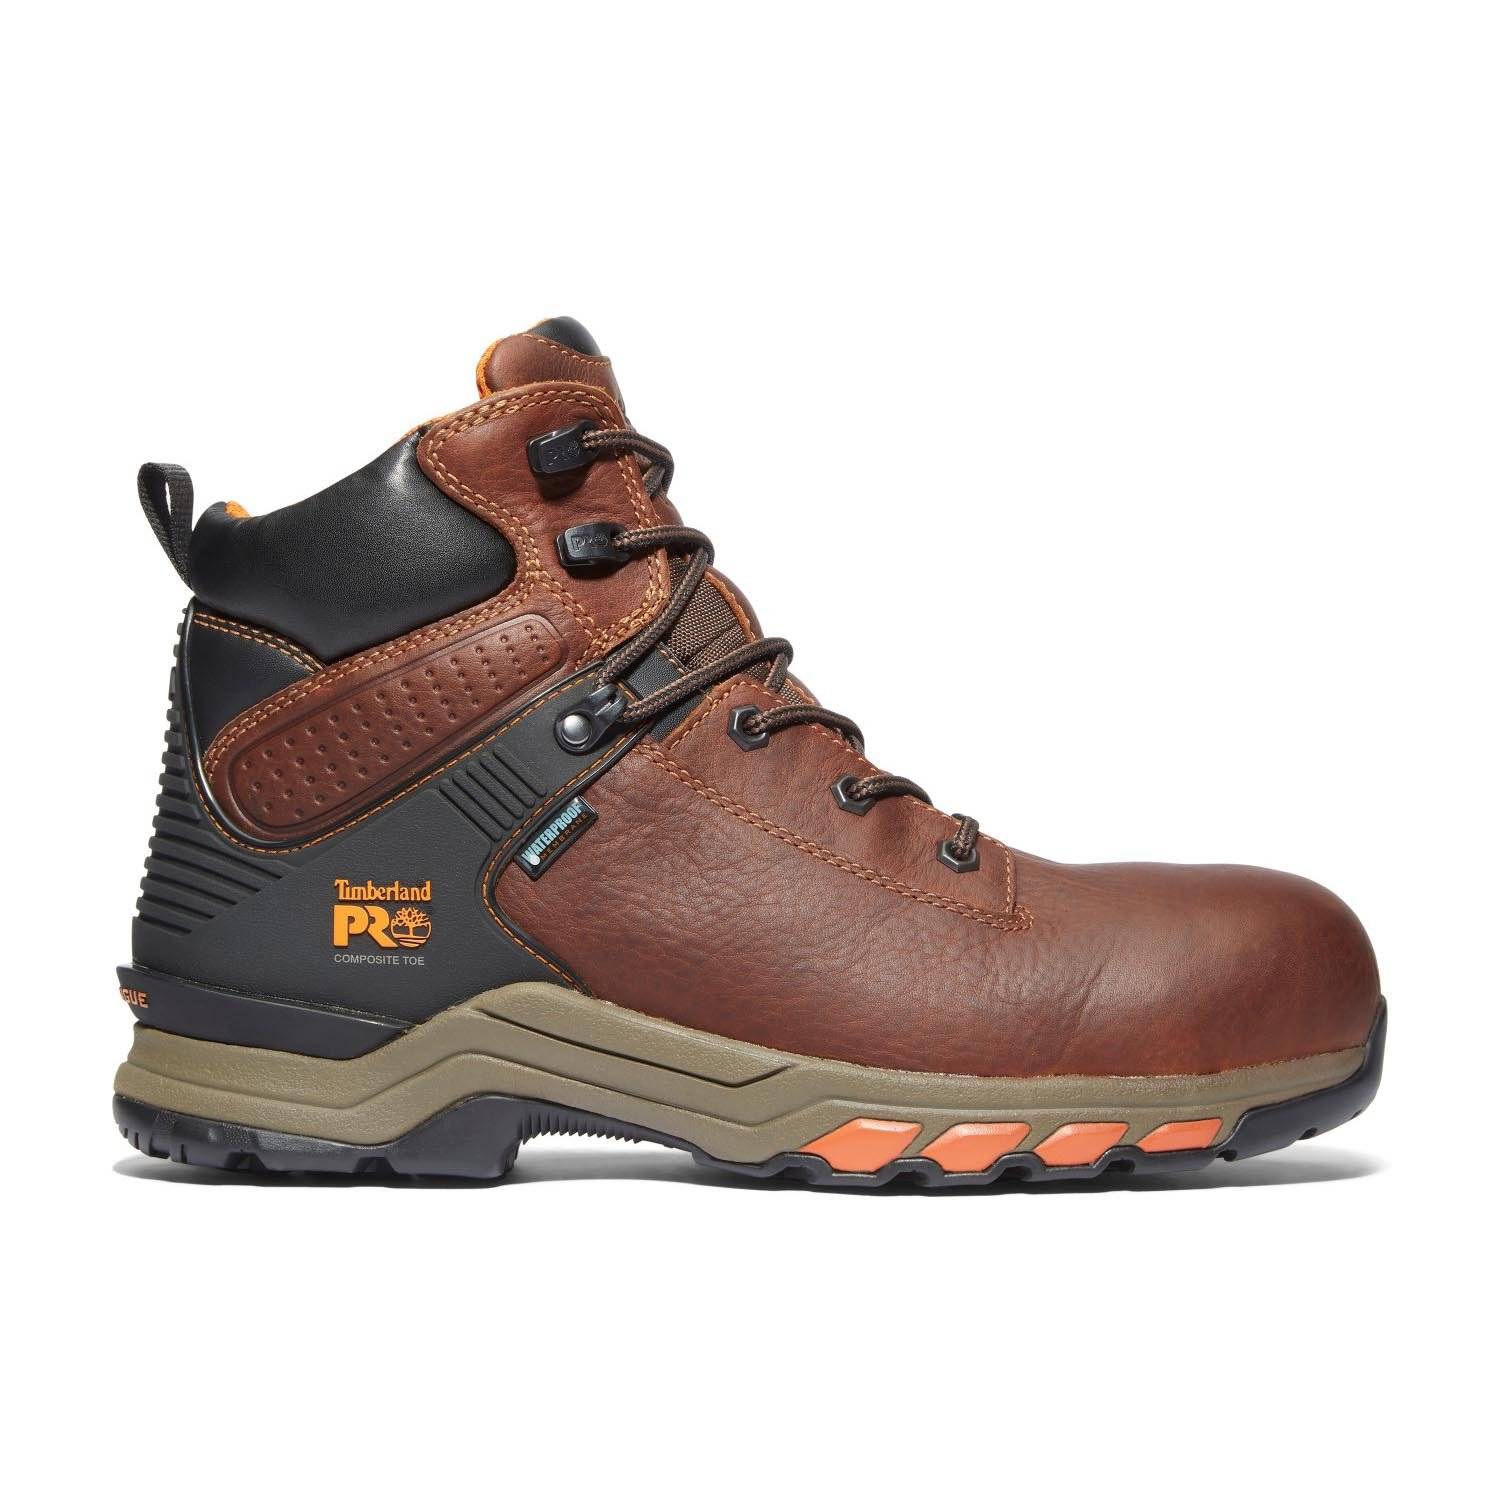 Timberland Men's 6" Hypercharge Composite Toe Work Boots